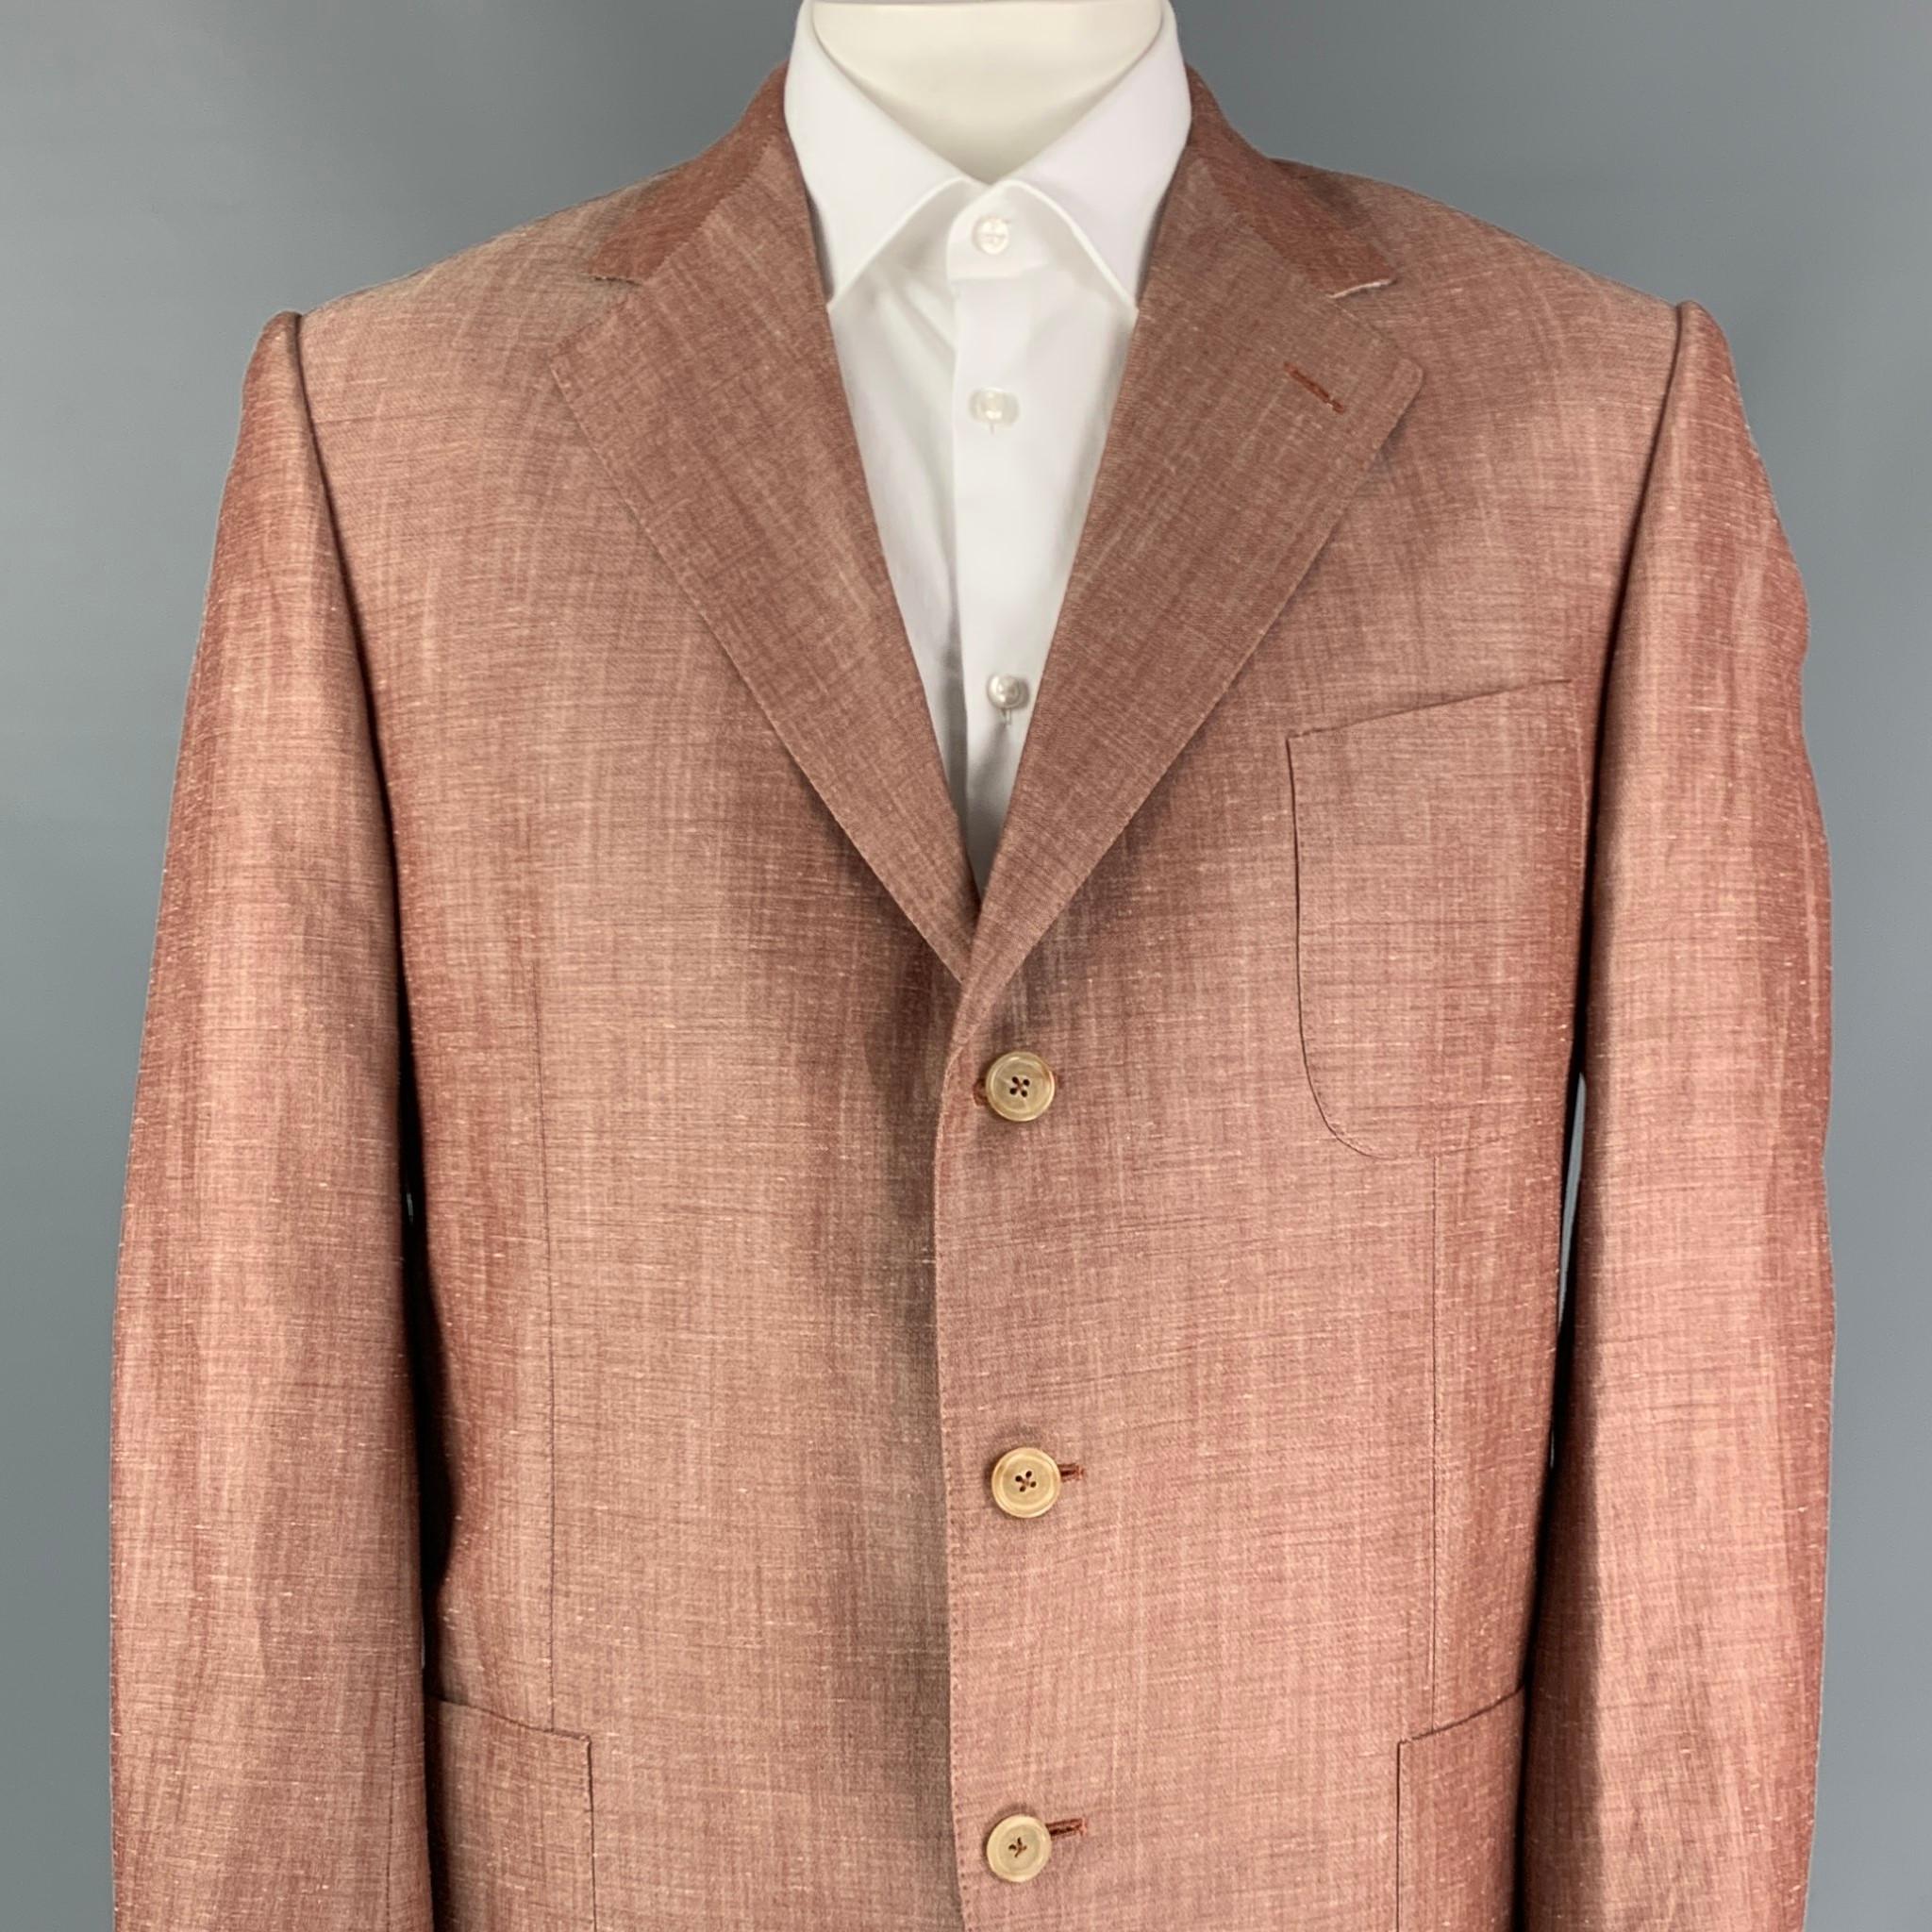 ERMENEGILDO ZEGNA sport coat comes in a brick & cream wool blend with a half liner featuring a notch lapel, double back vent, patch pockets, and a three button closure 

Very Good Pre-Owned Condition.
Marked: 54 R

Measurements:

Shoulder: 19